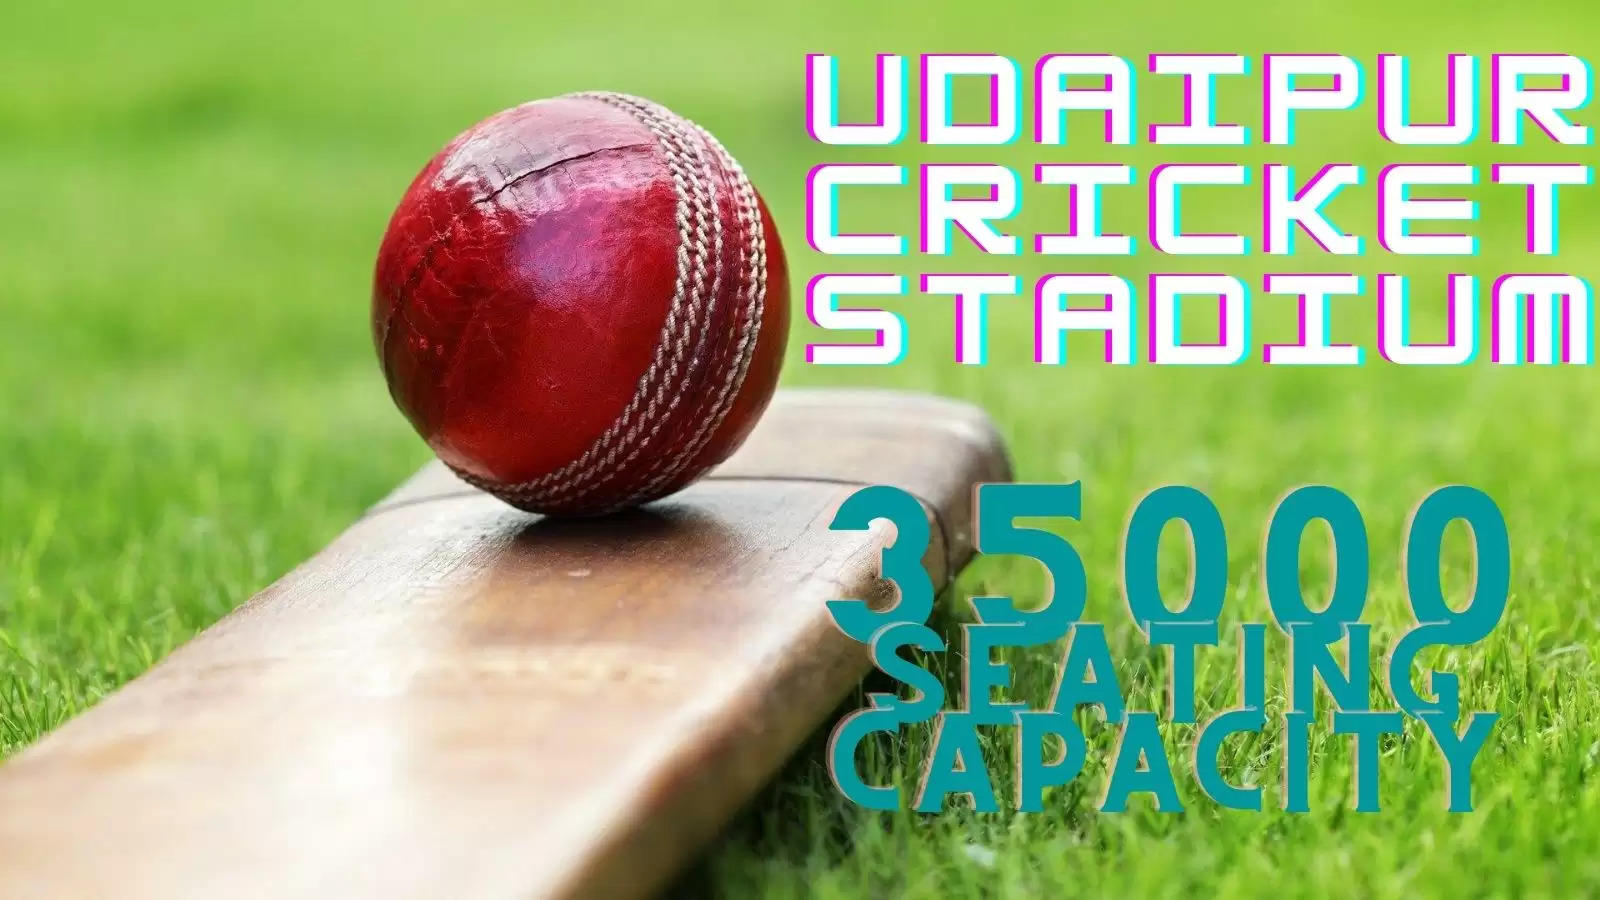 udaipur cricket stadium in udaipur 35000 seating capacity construction begins in november